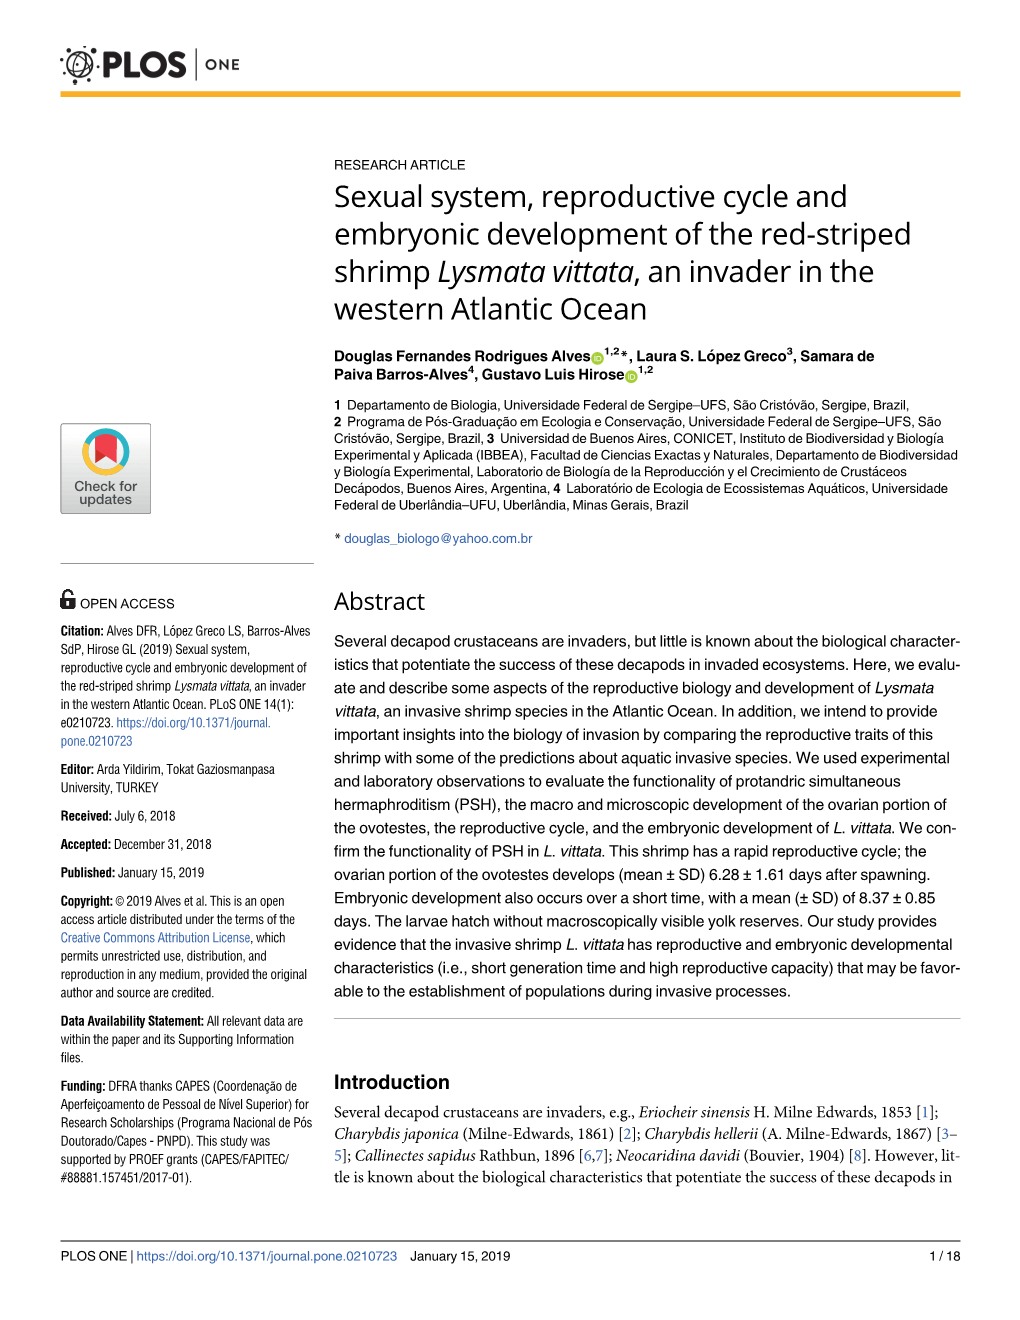 Sexual System, Reproductive Cycle and Embryonic Development of the Red-Striped Shrimp Lysmata Vittata, an Invader in the Western Atlantic Ocean